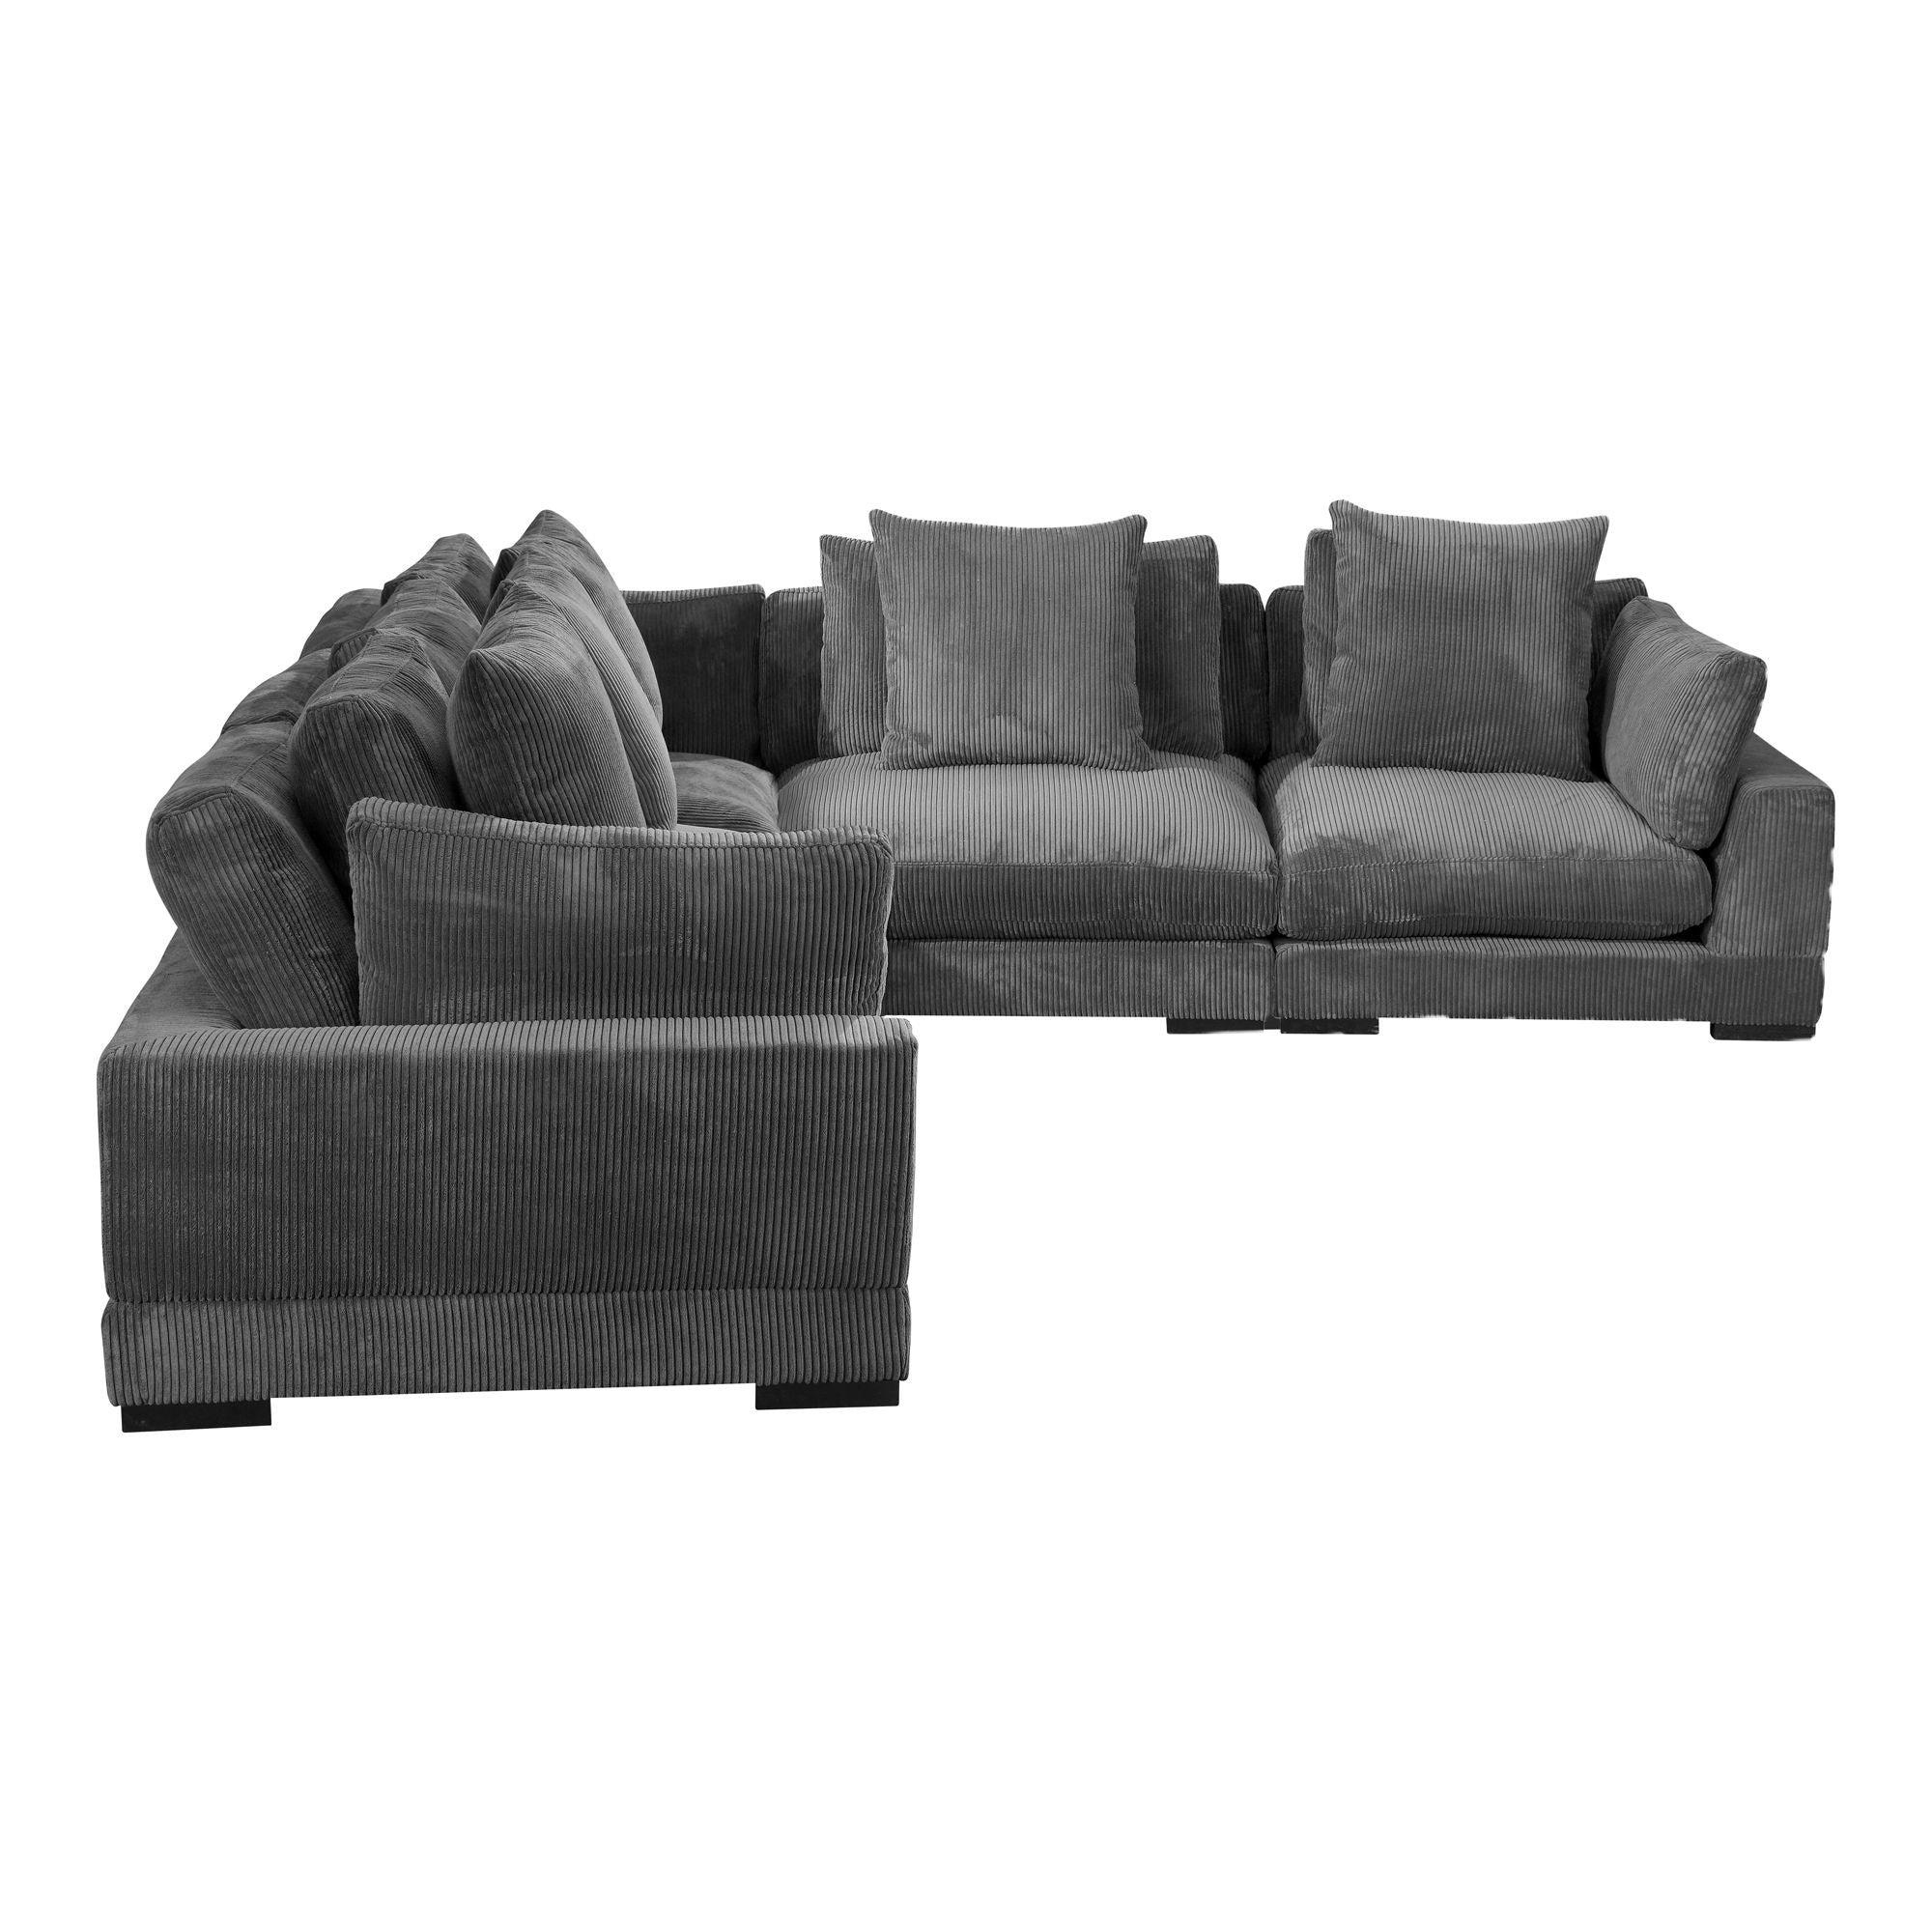 Tumble Charcoal Corduroy L Sectional Modular-Stationary Sectionals-American Furniture Outlet